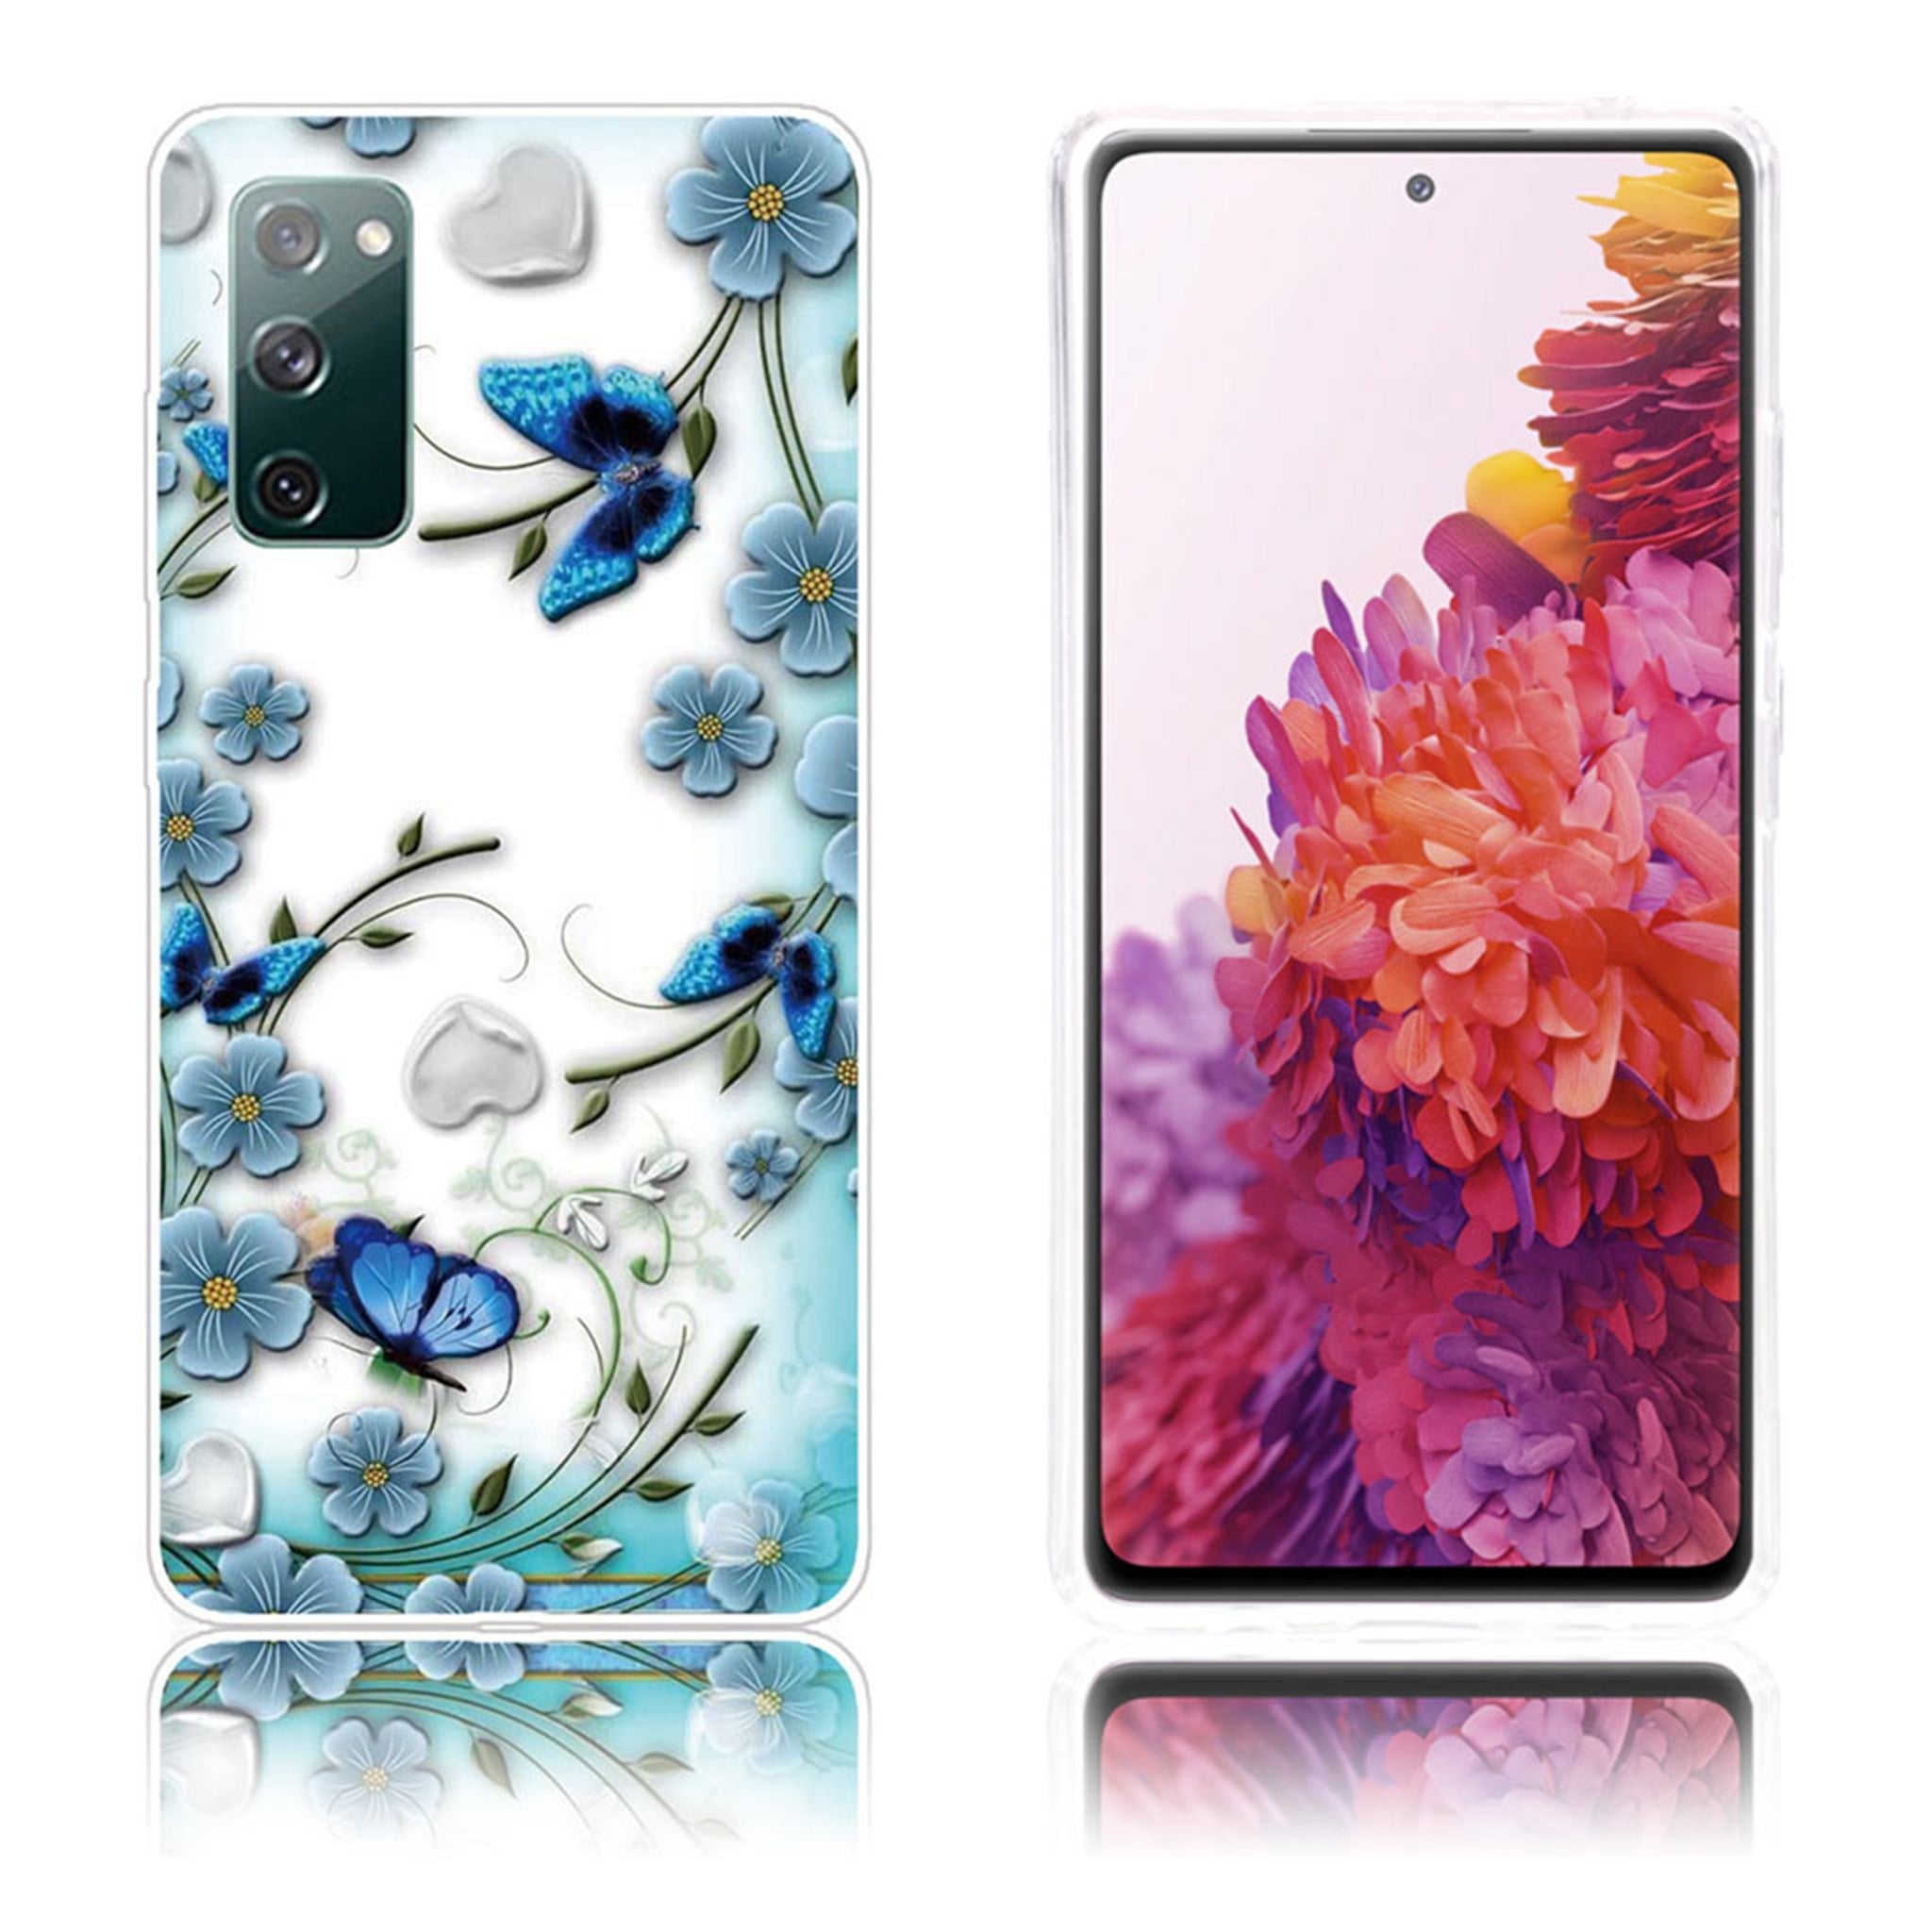 Deco Samsung Galaxy S20 FE 5G / S20 FE case - Blue Flower and Butterfly